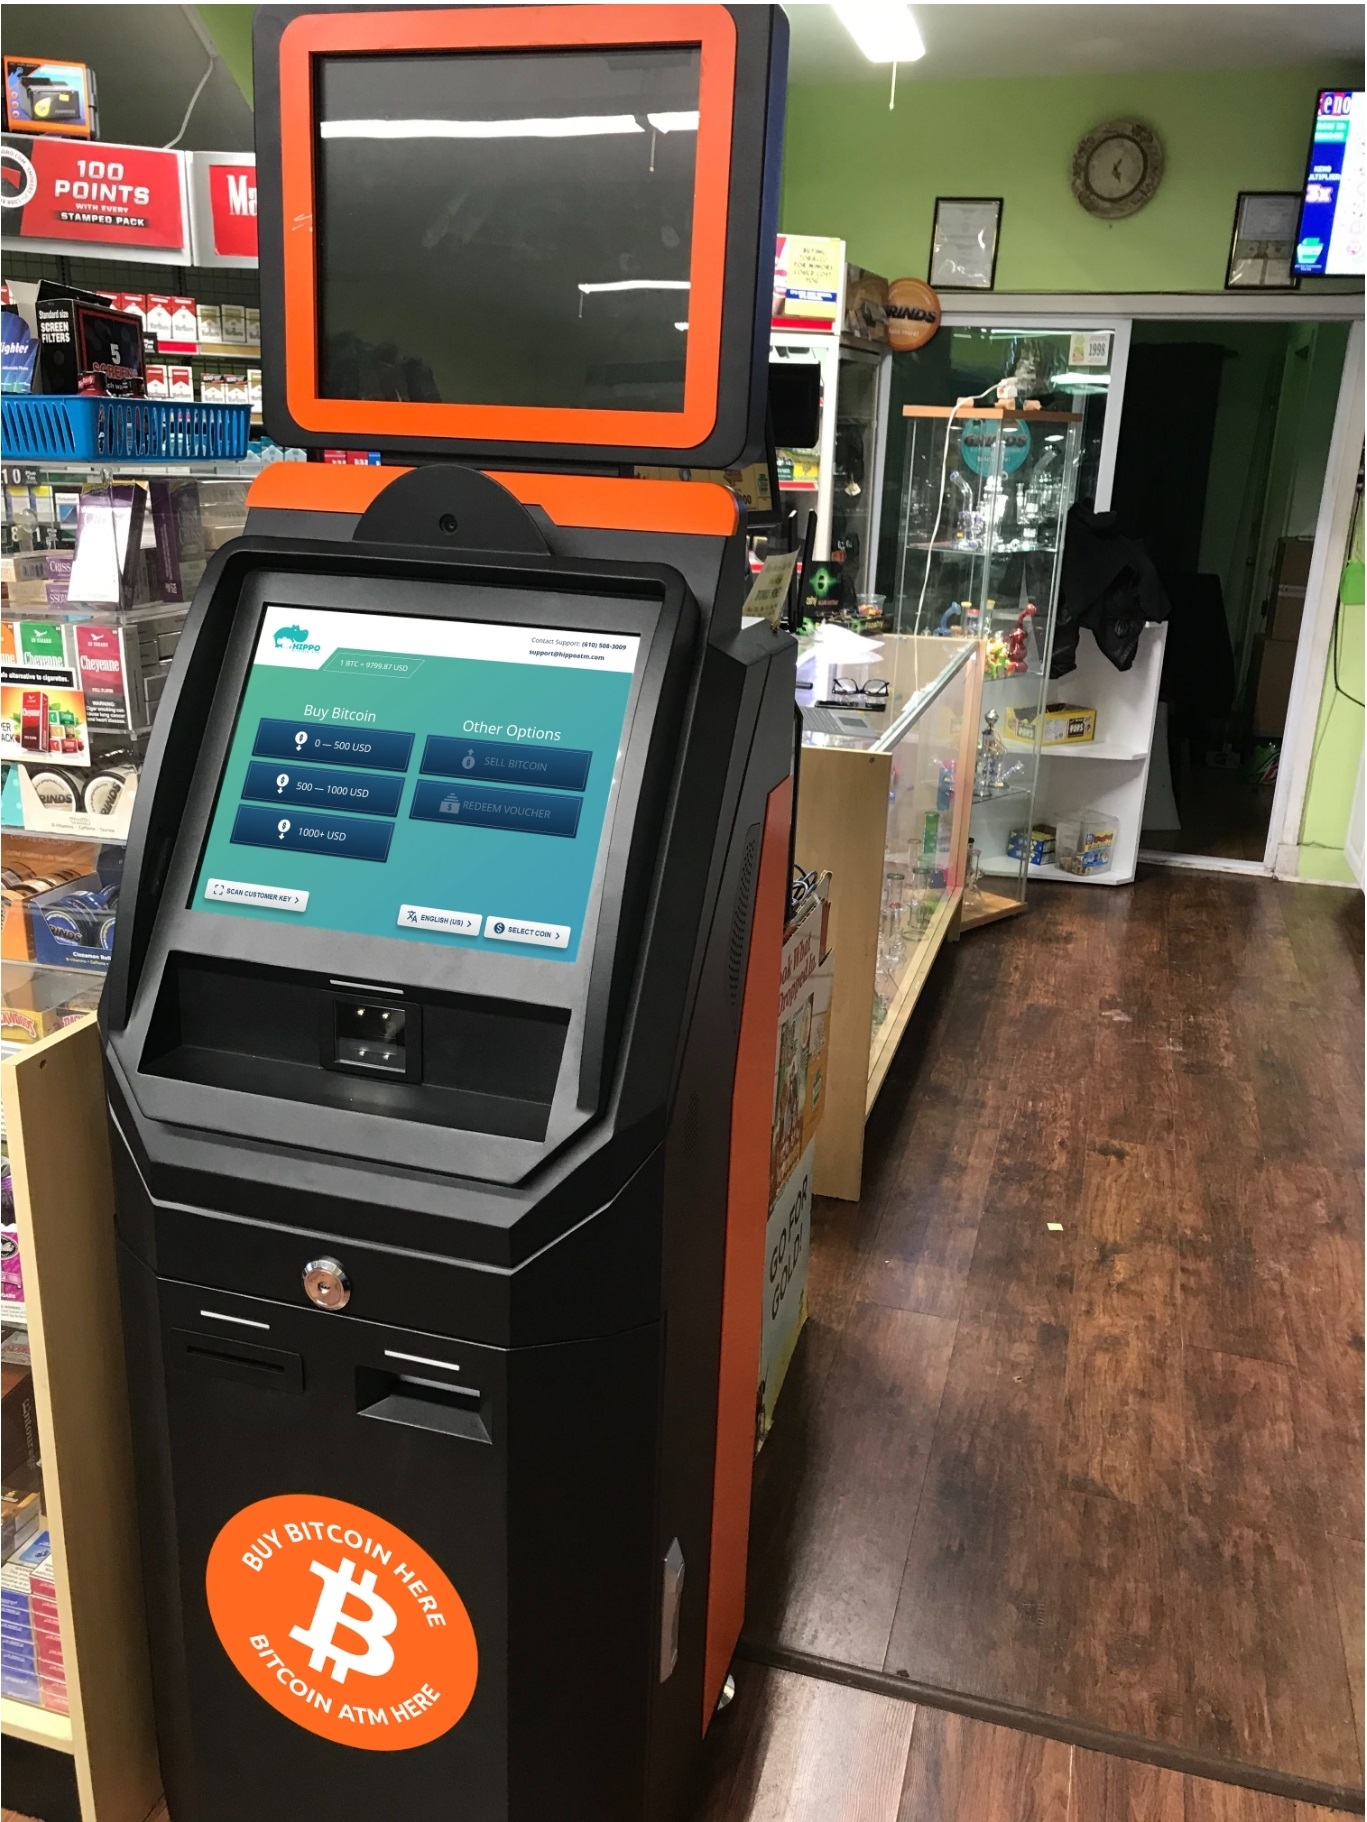 Bitcoin ATM Installed in the Elizabethtown | ChainBytes